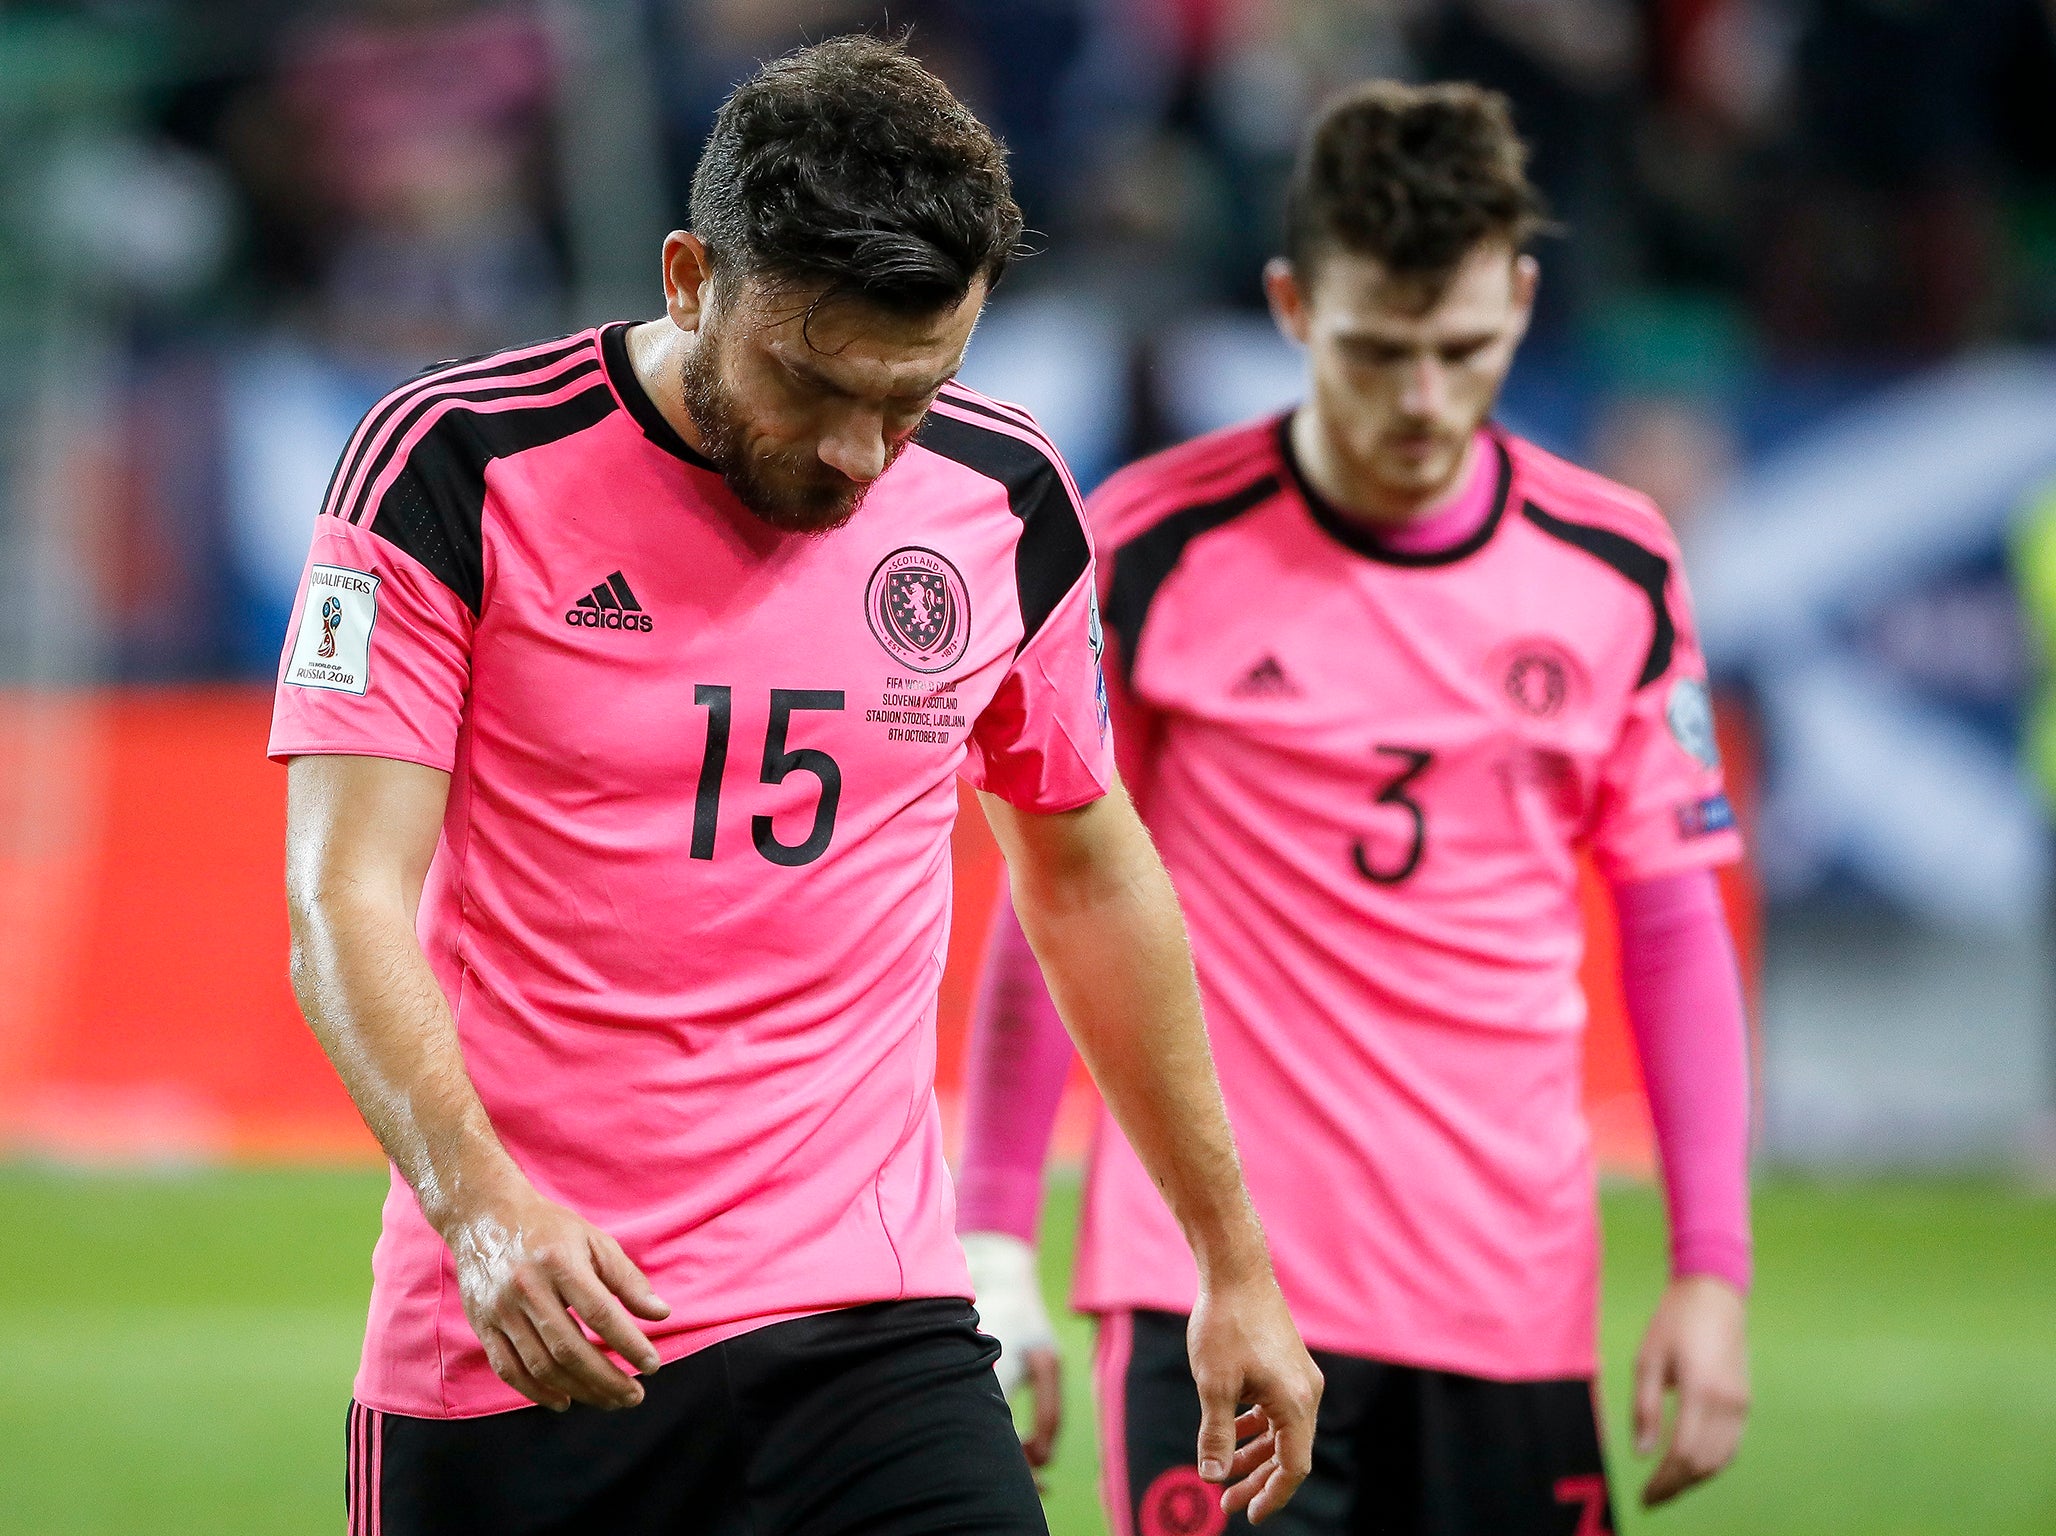 Scotland's World Cup dream is over